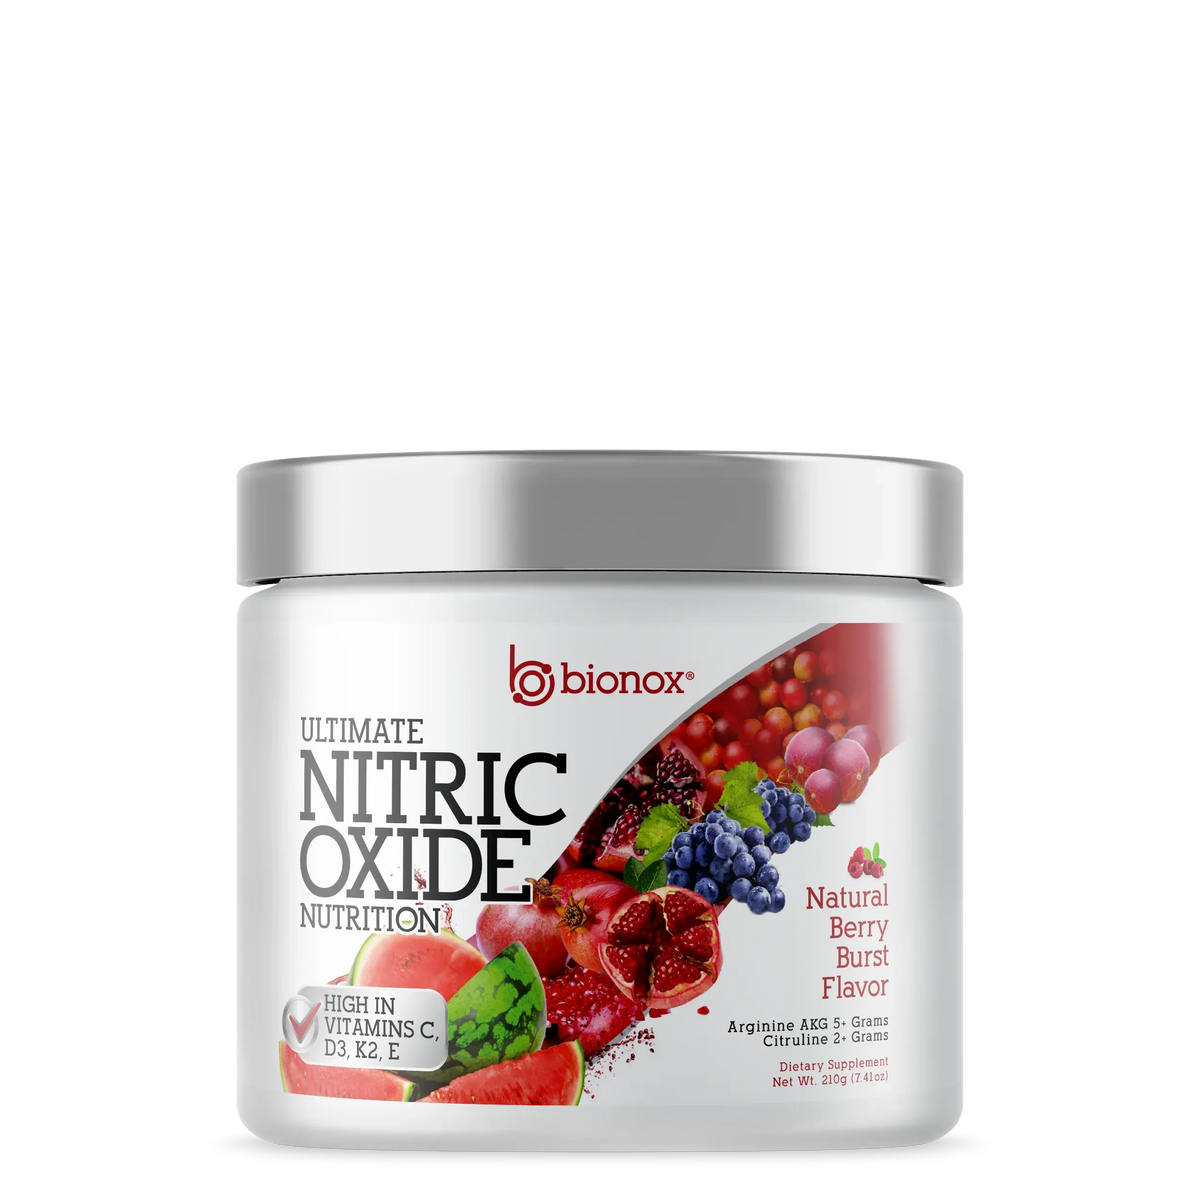 Ultimate Nitric Oxide Nutrition Berry Burst Flavor - Small